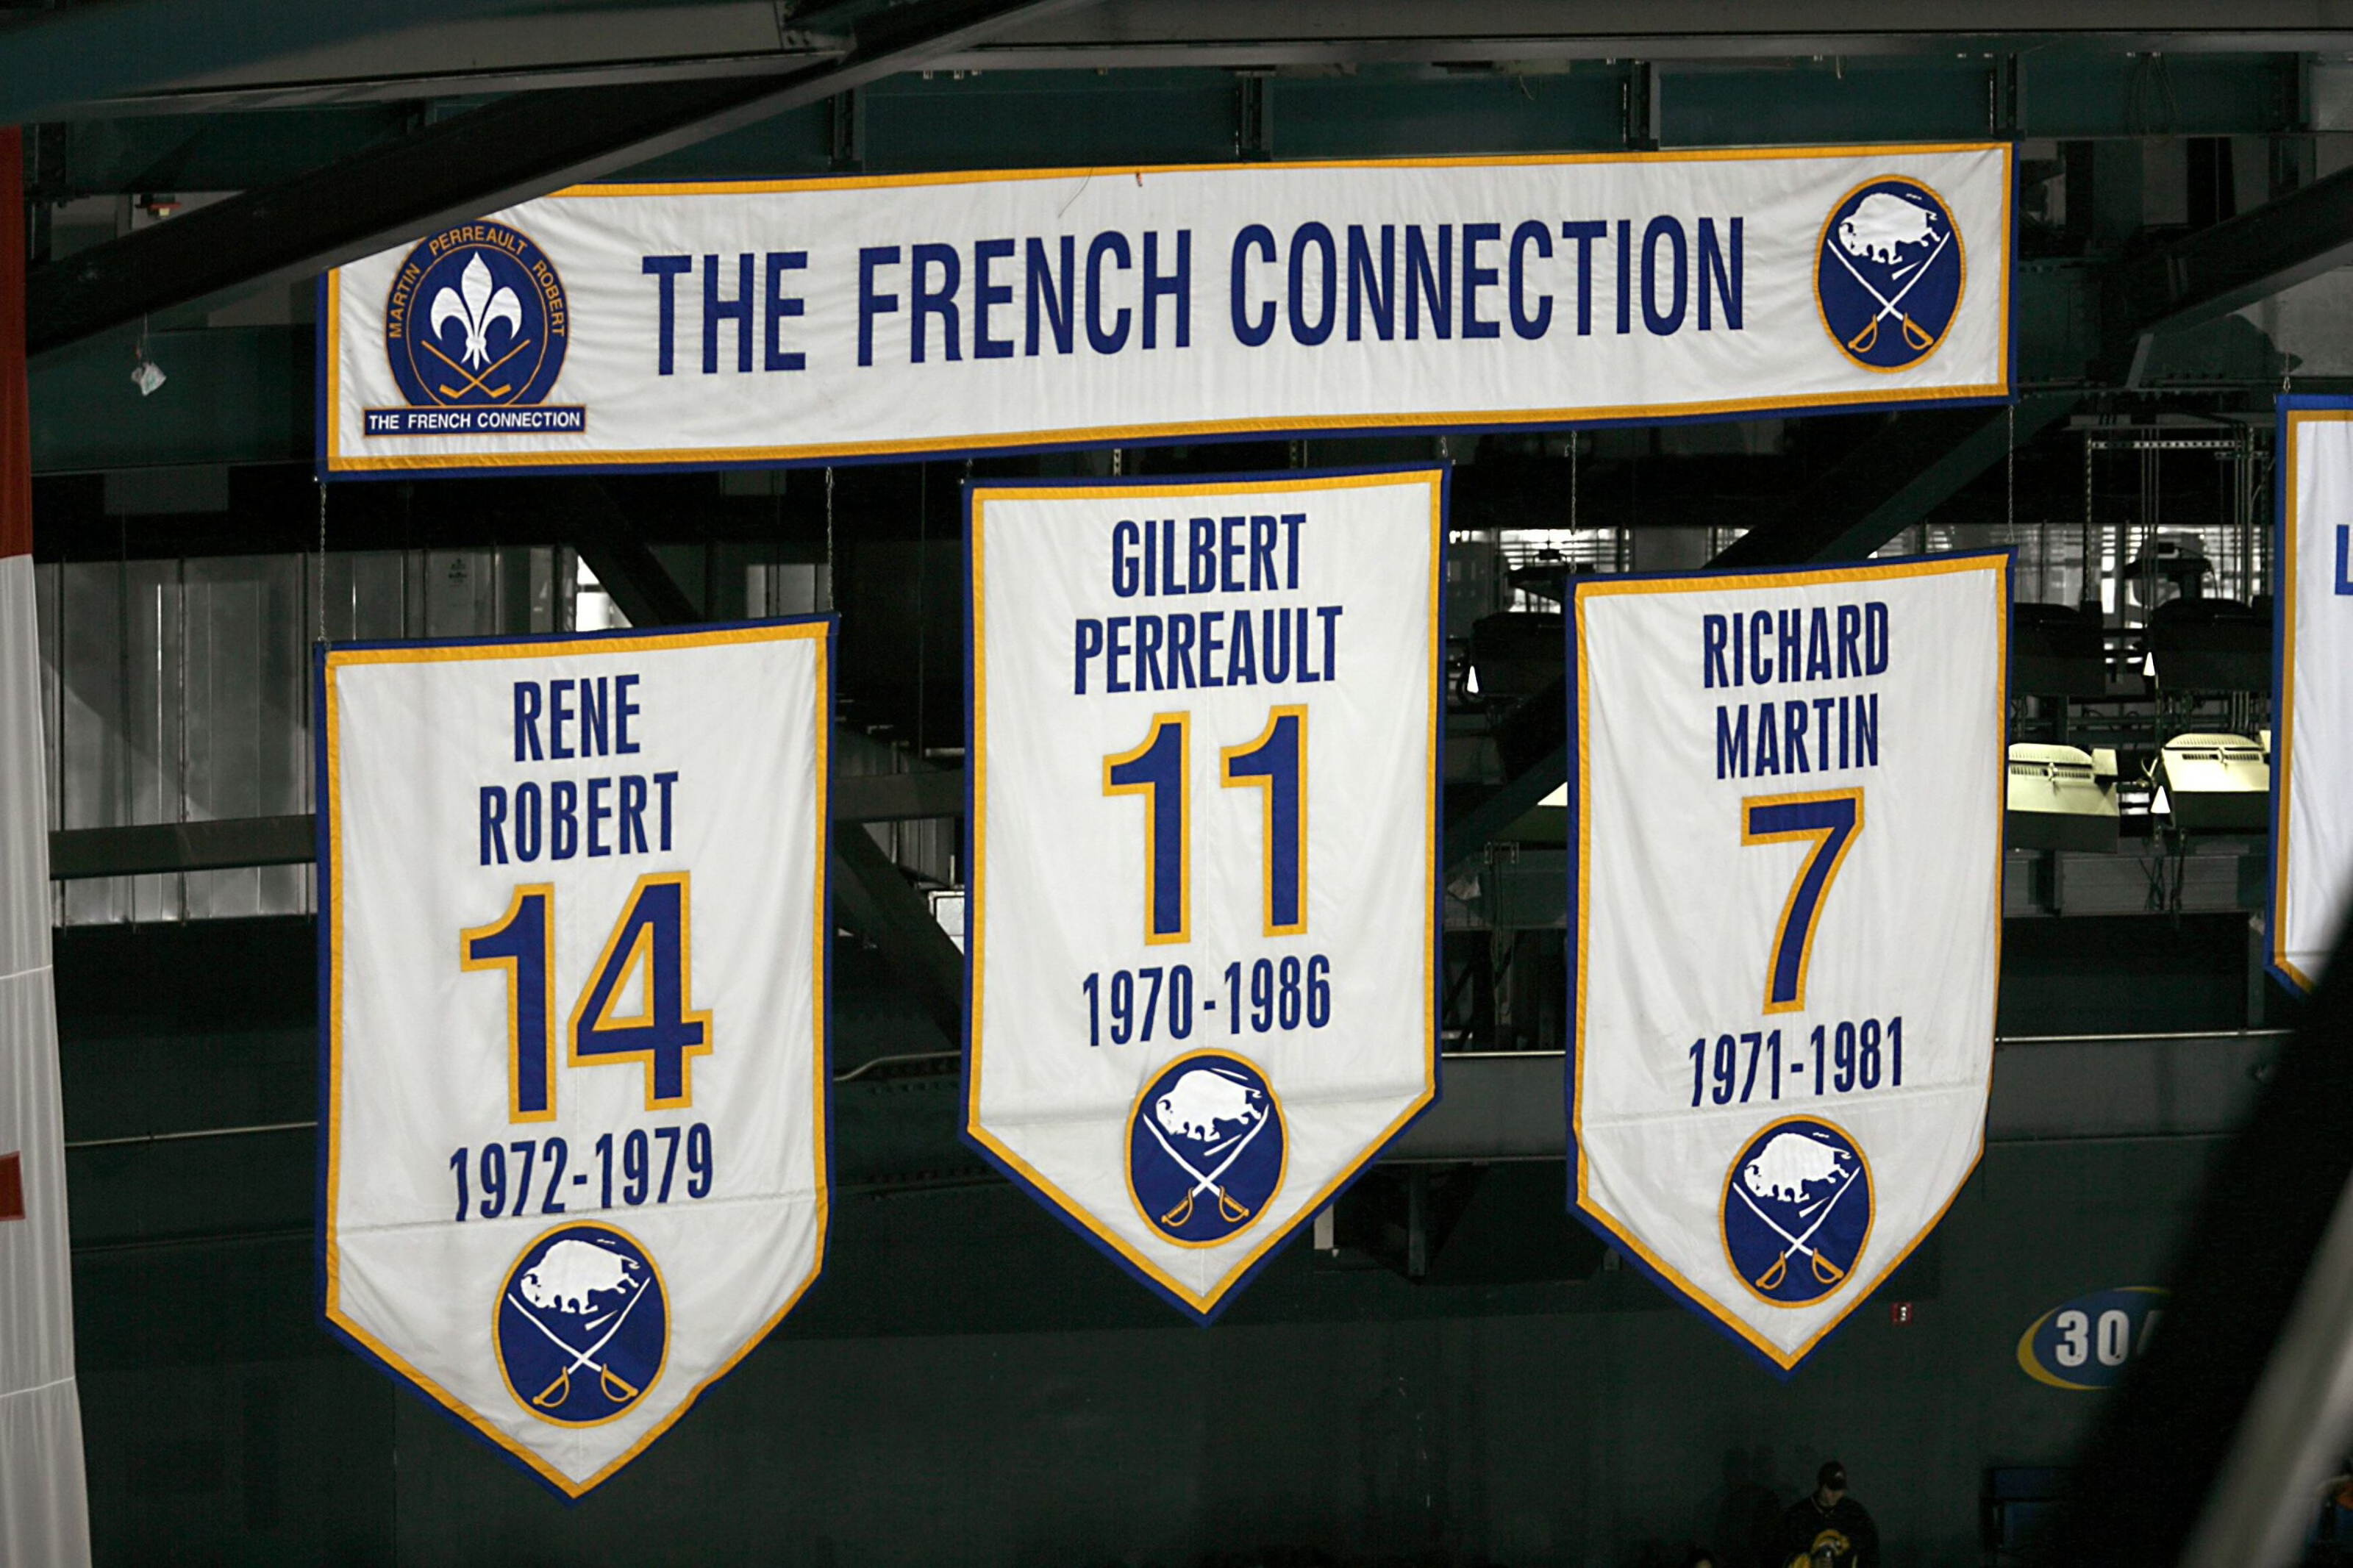 Jeannert's legacy as voice of the Sabres includes goals by